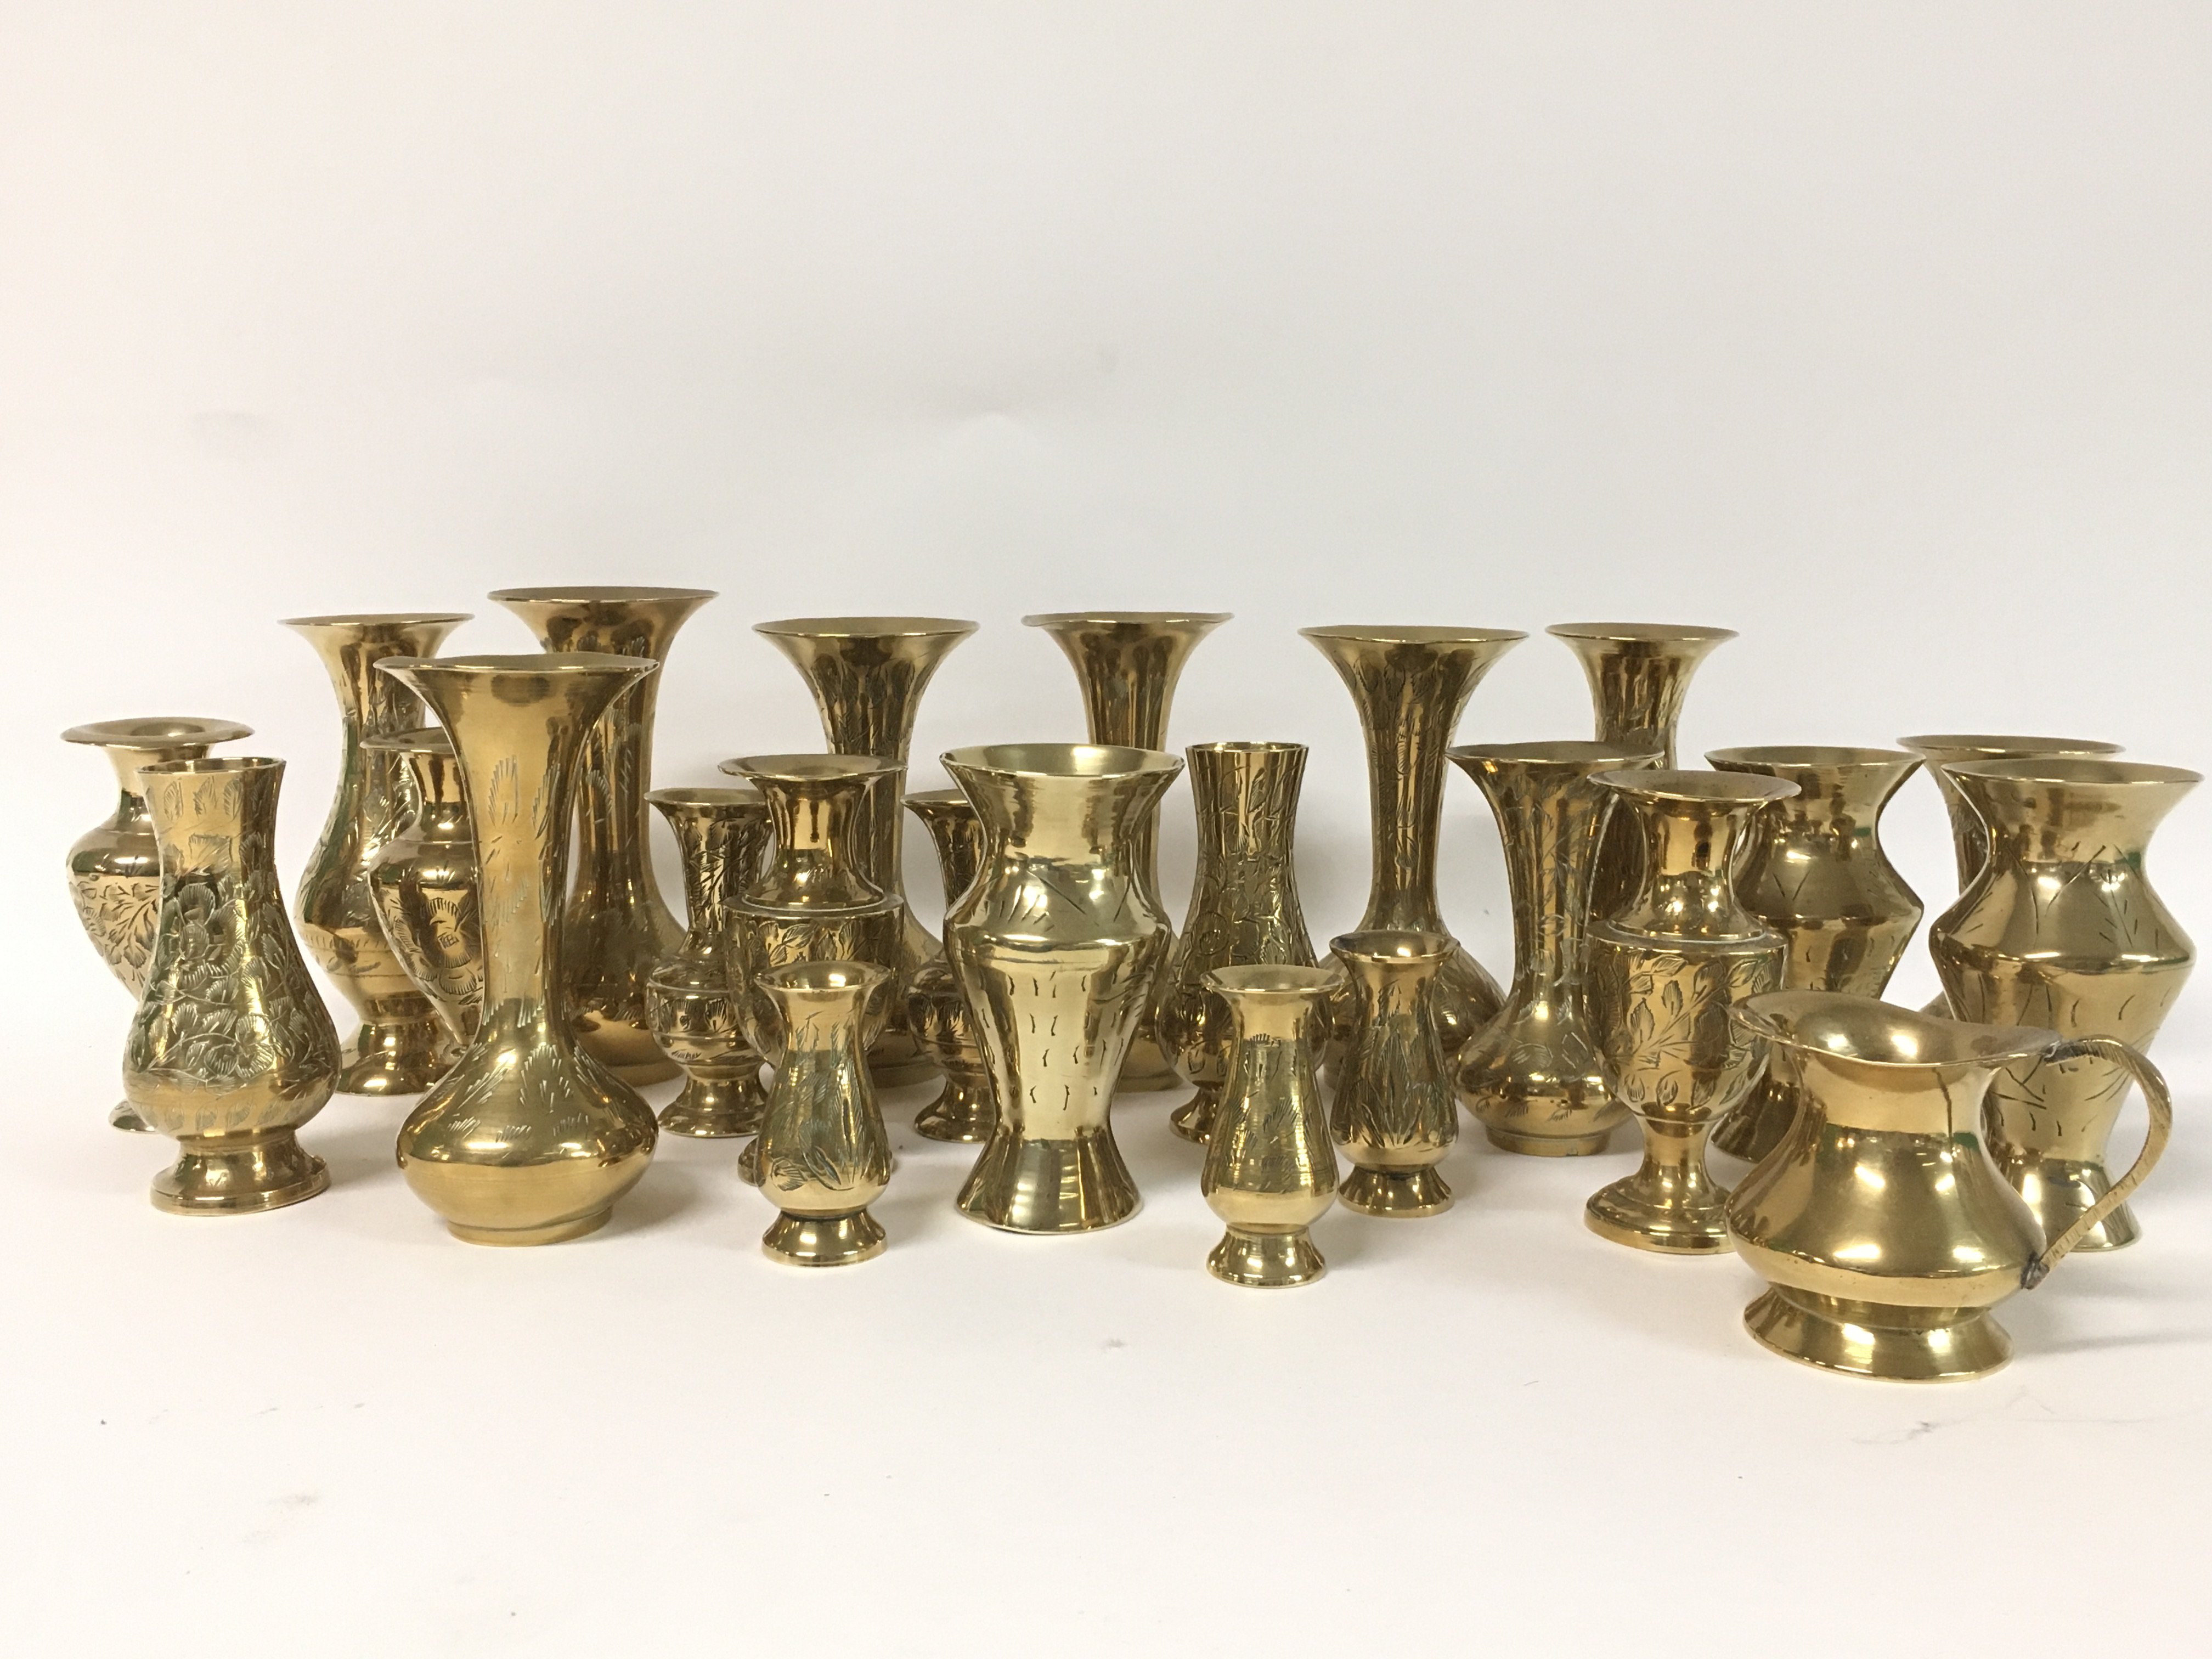 Brass ornaments, made in India